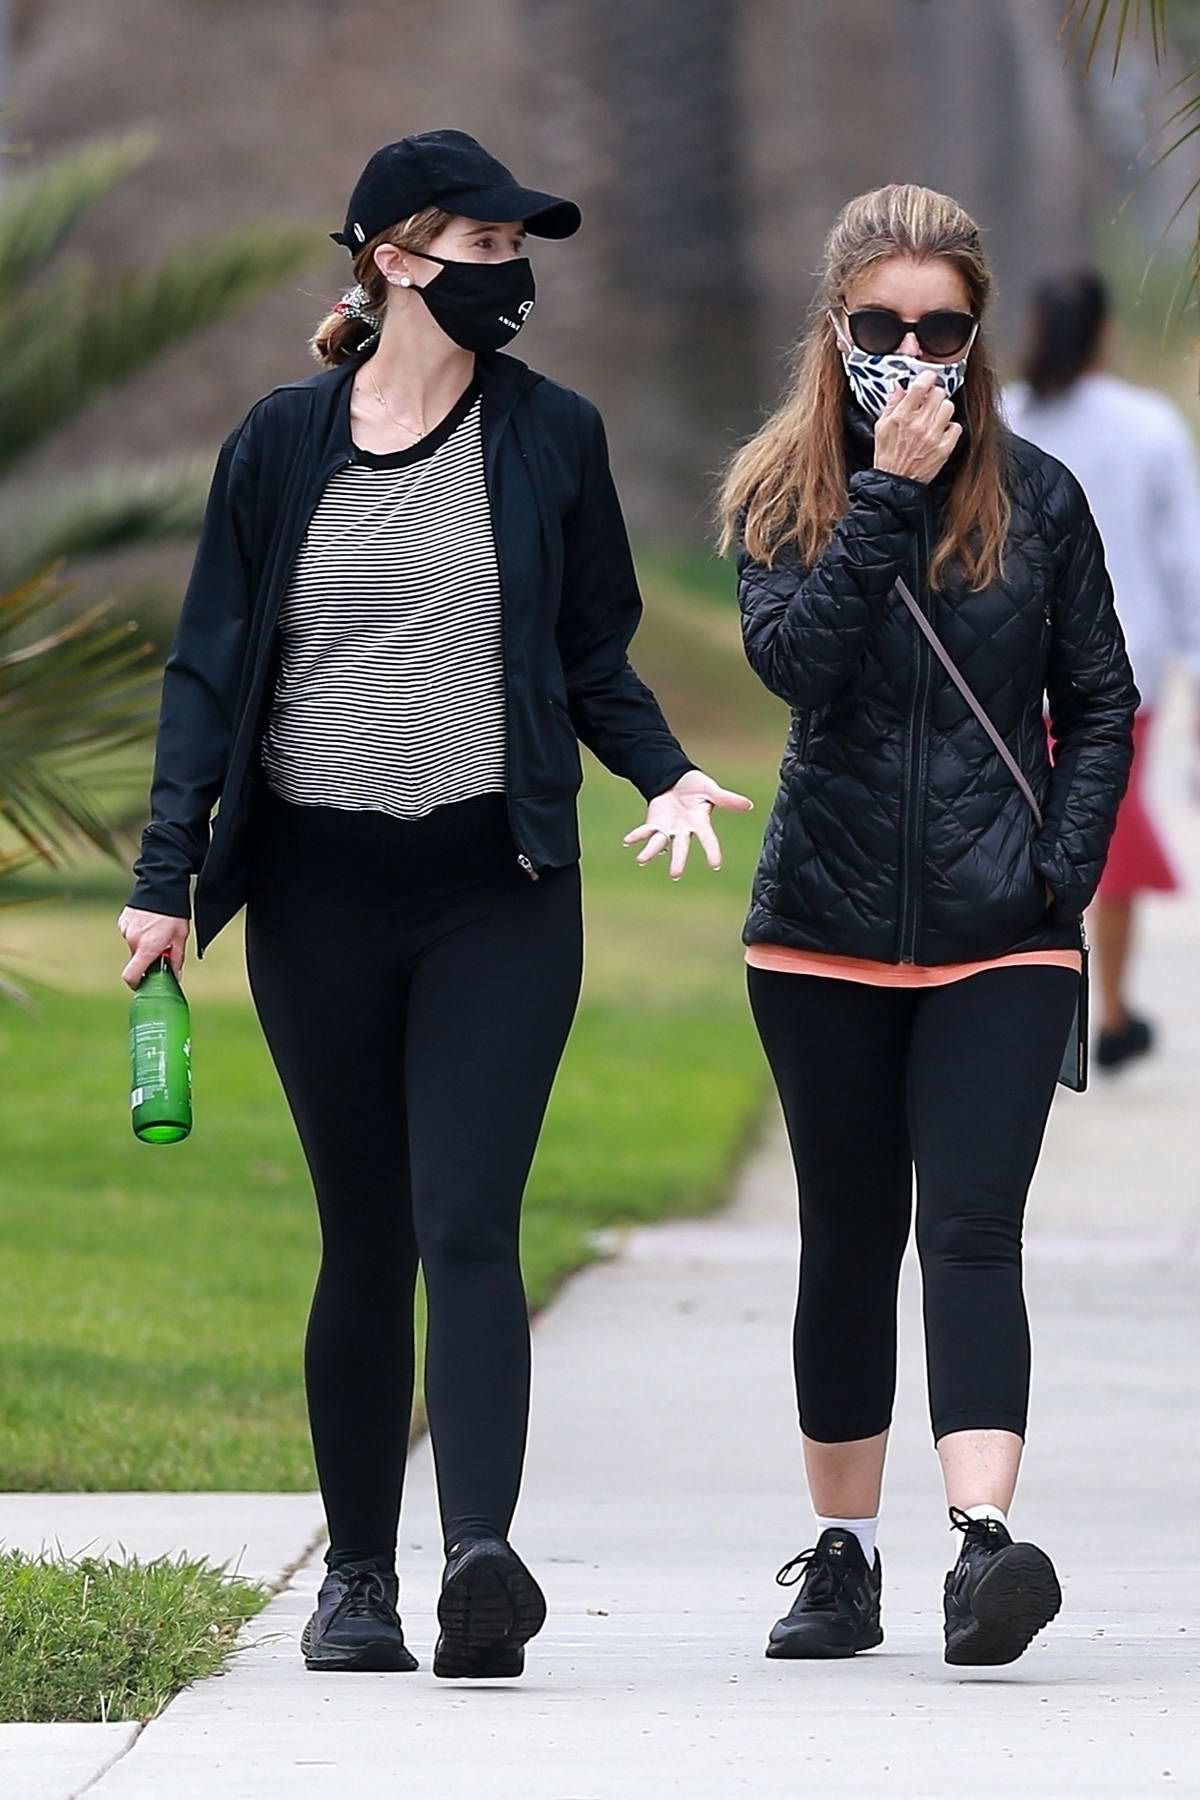 Katherine Schwarzenegger steps out in jeans for a coffee run with sister  Christina in Los Angeles